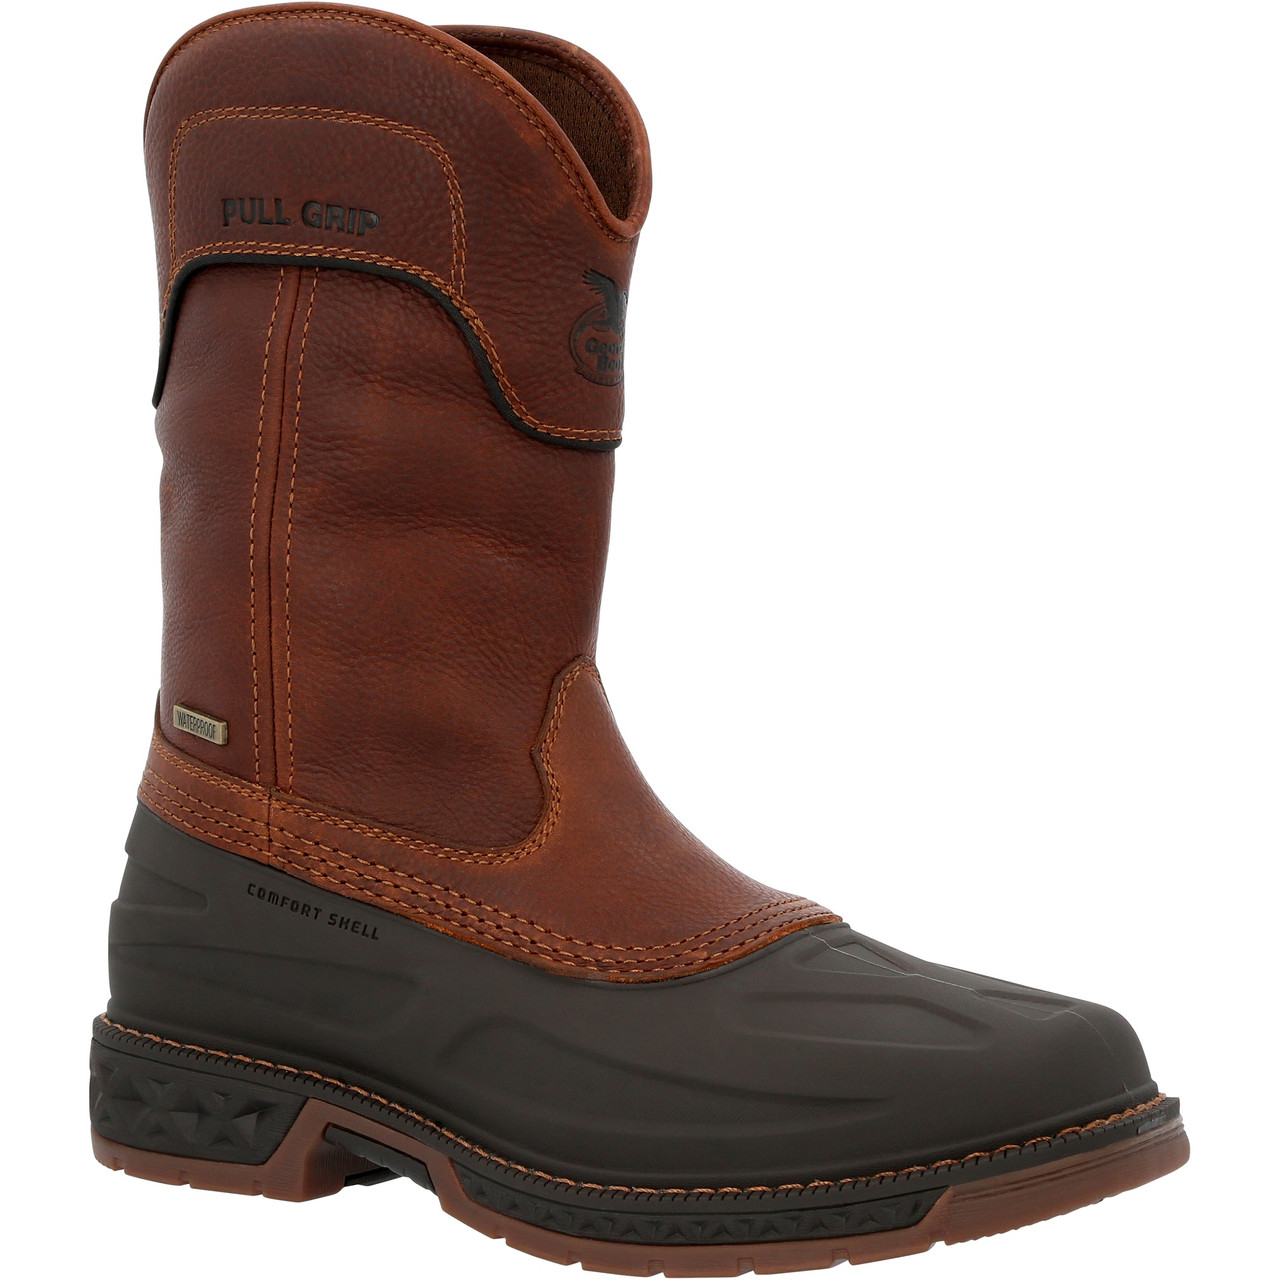 GEORGIA BOOT CARBO-TEC LTR WATERPROOF PULL ON BOOTS GB00470